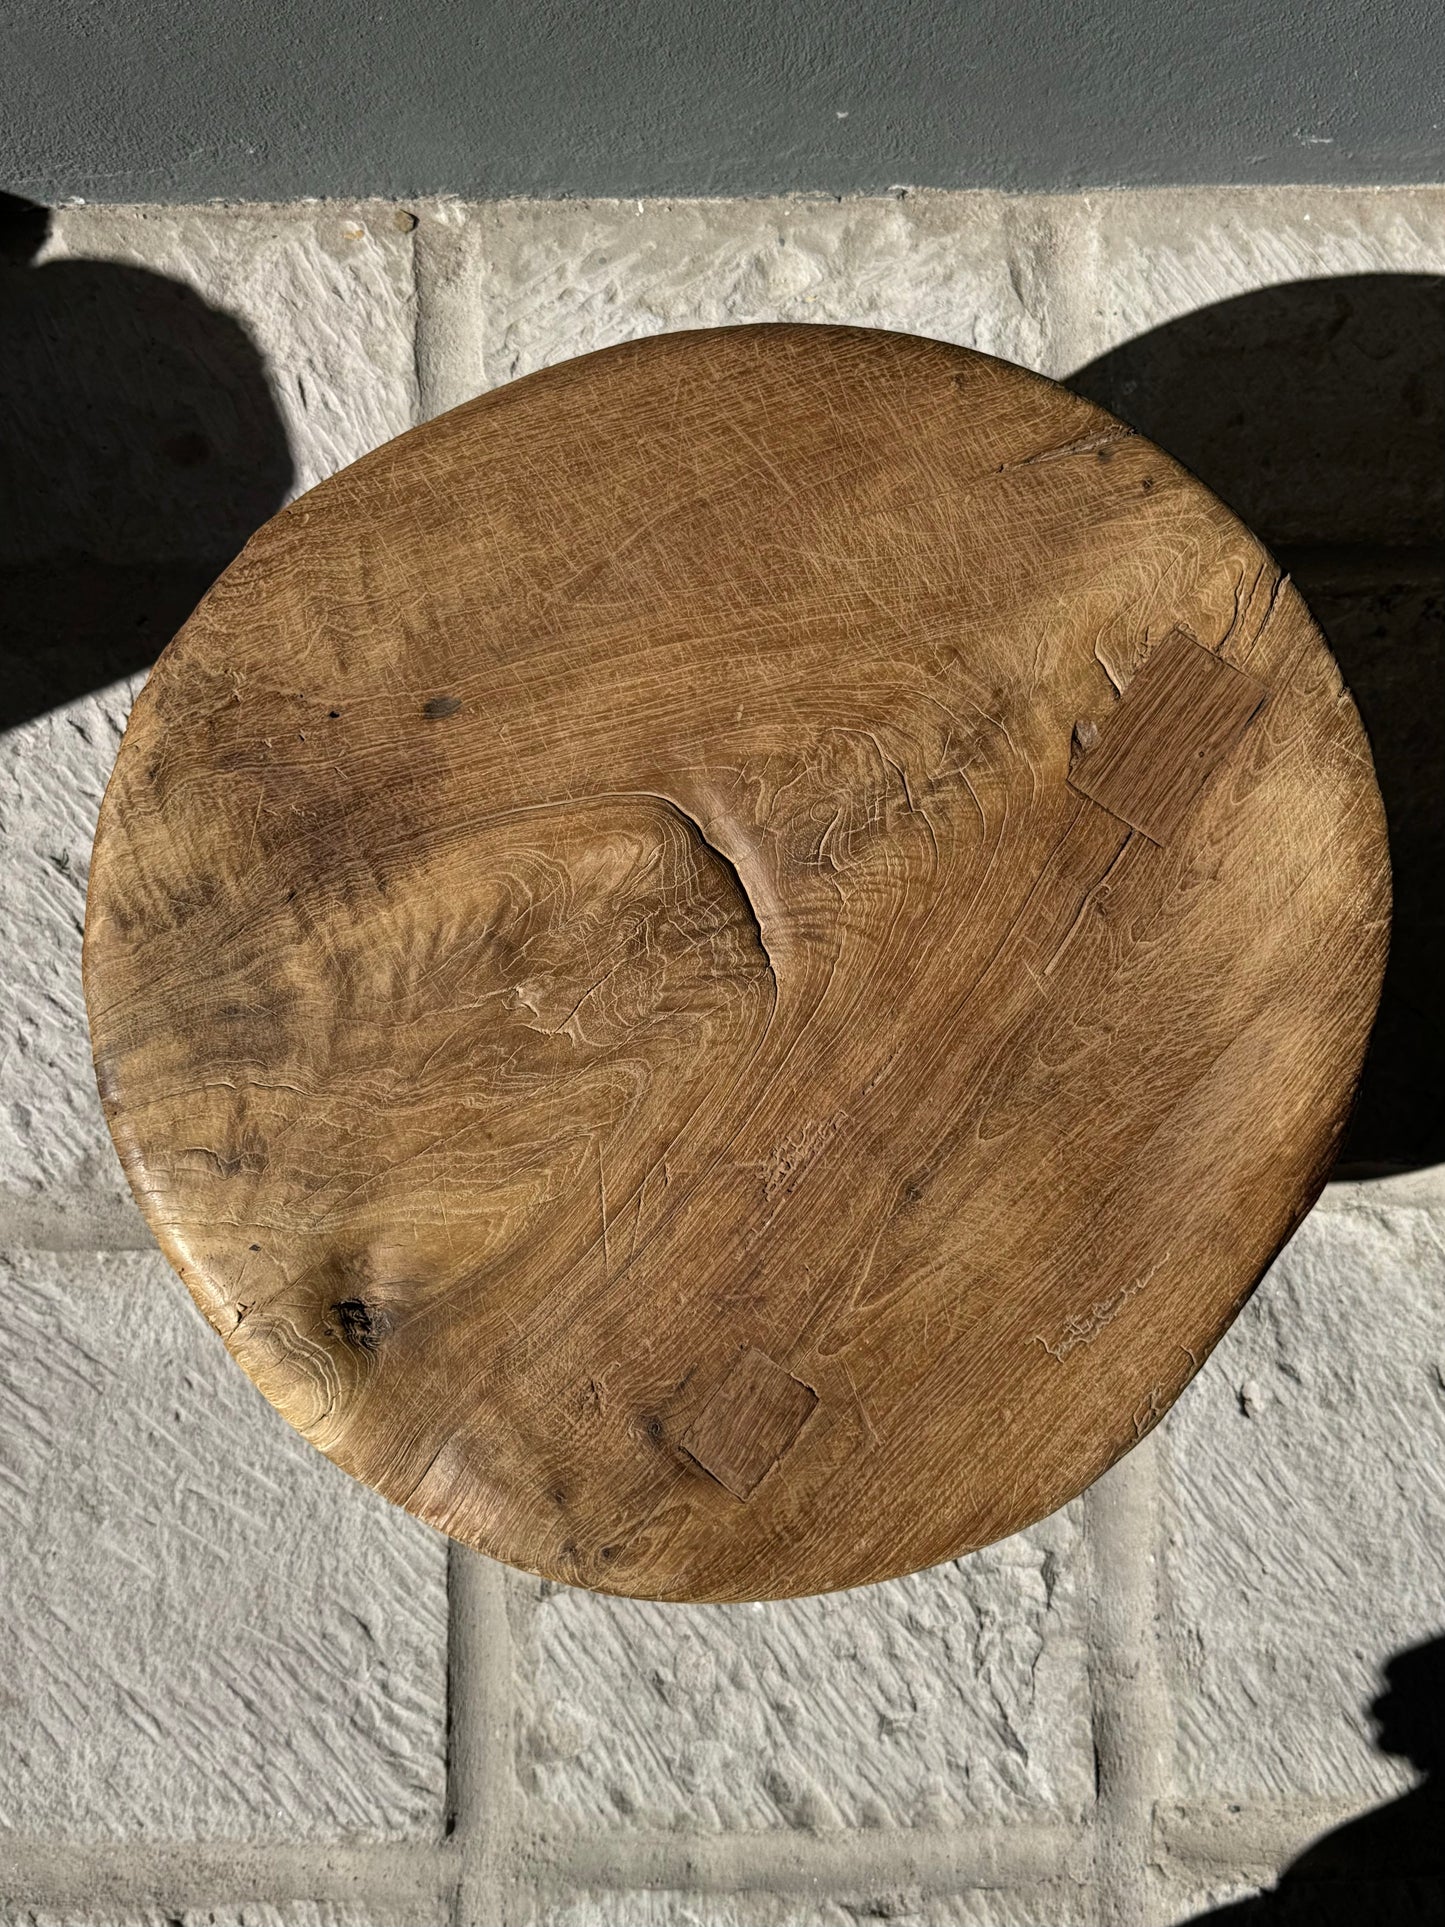 Primitive Hardwood Round Table From Central Yucatán